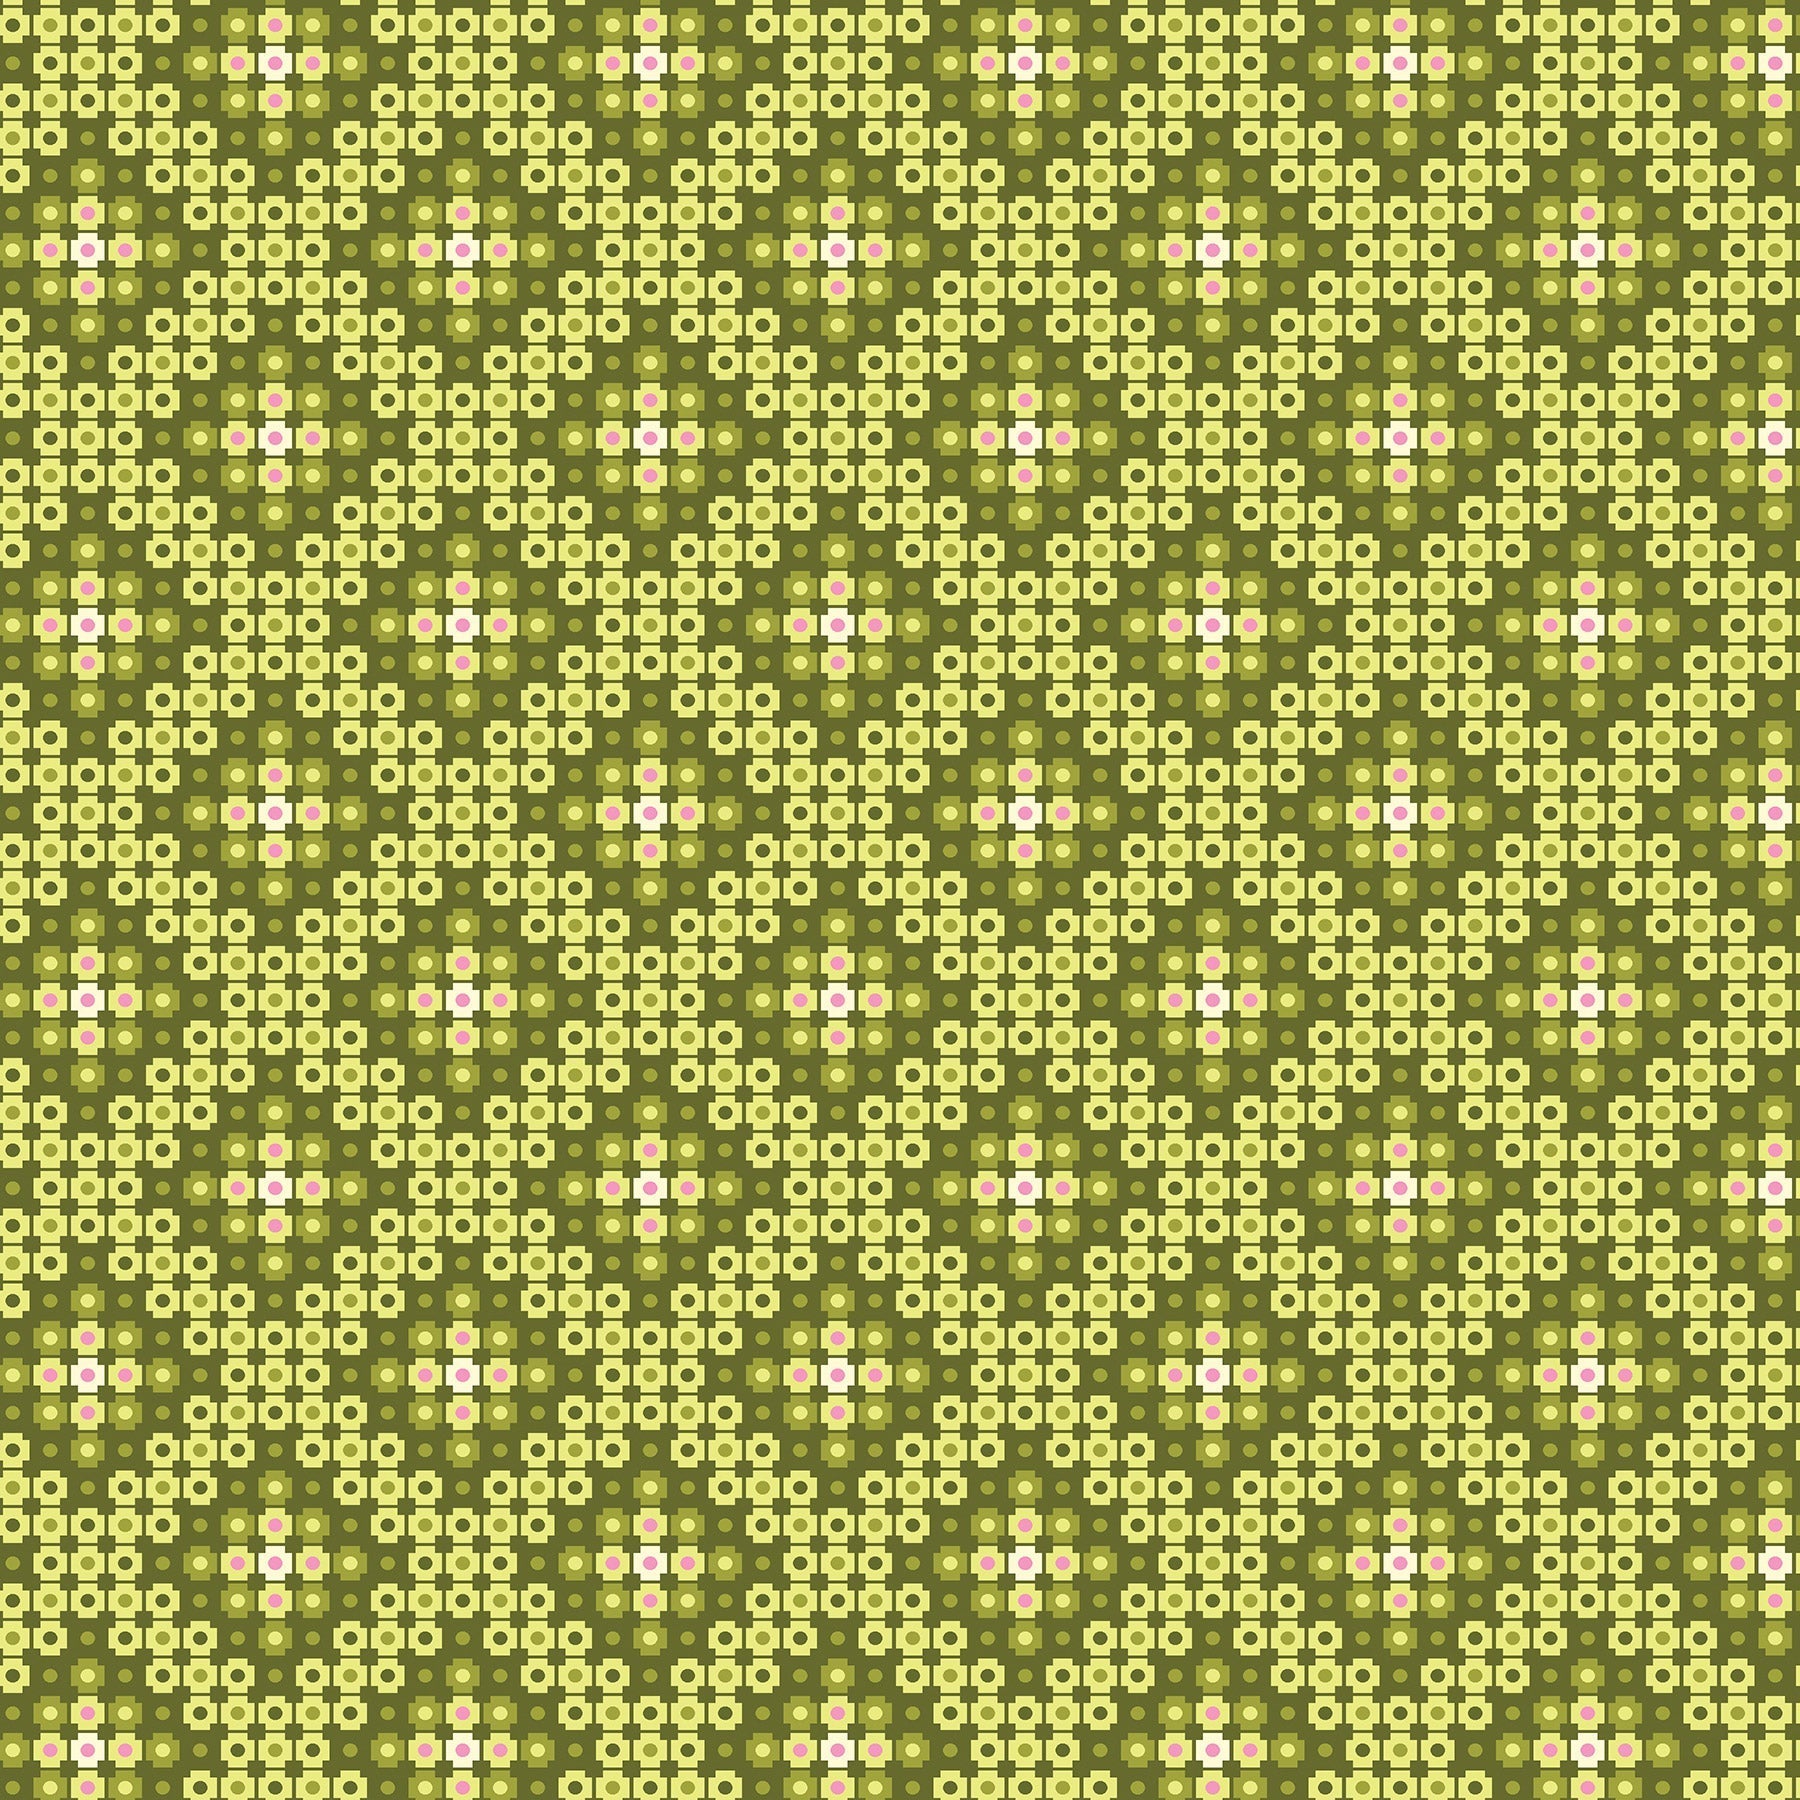  Crossweave in green (13266-43)  is from Stitchy by Christa Watson for Benartex. The crossweave print features pixelated shapes in shades of green ranging from chartruese to olive, with a hint of turquoise and pink. The geometric pattern creates a striking contrast to the modern blenders presented in the rest of the line, and provides a balanced texture and interest to your project.